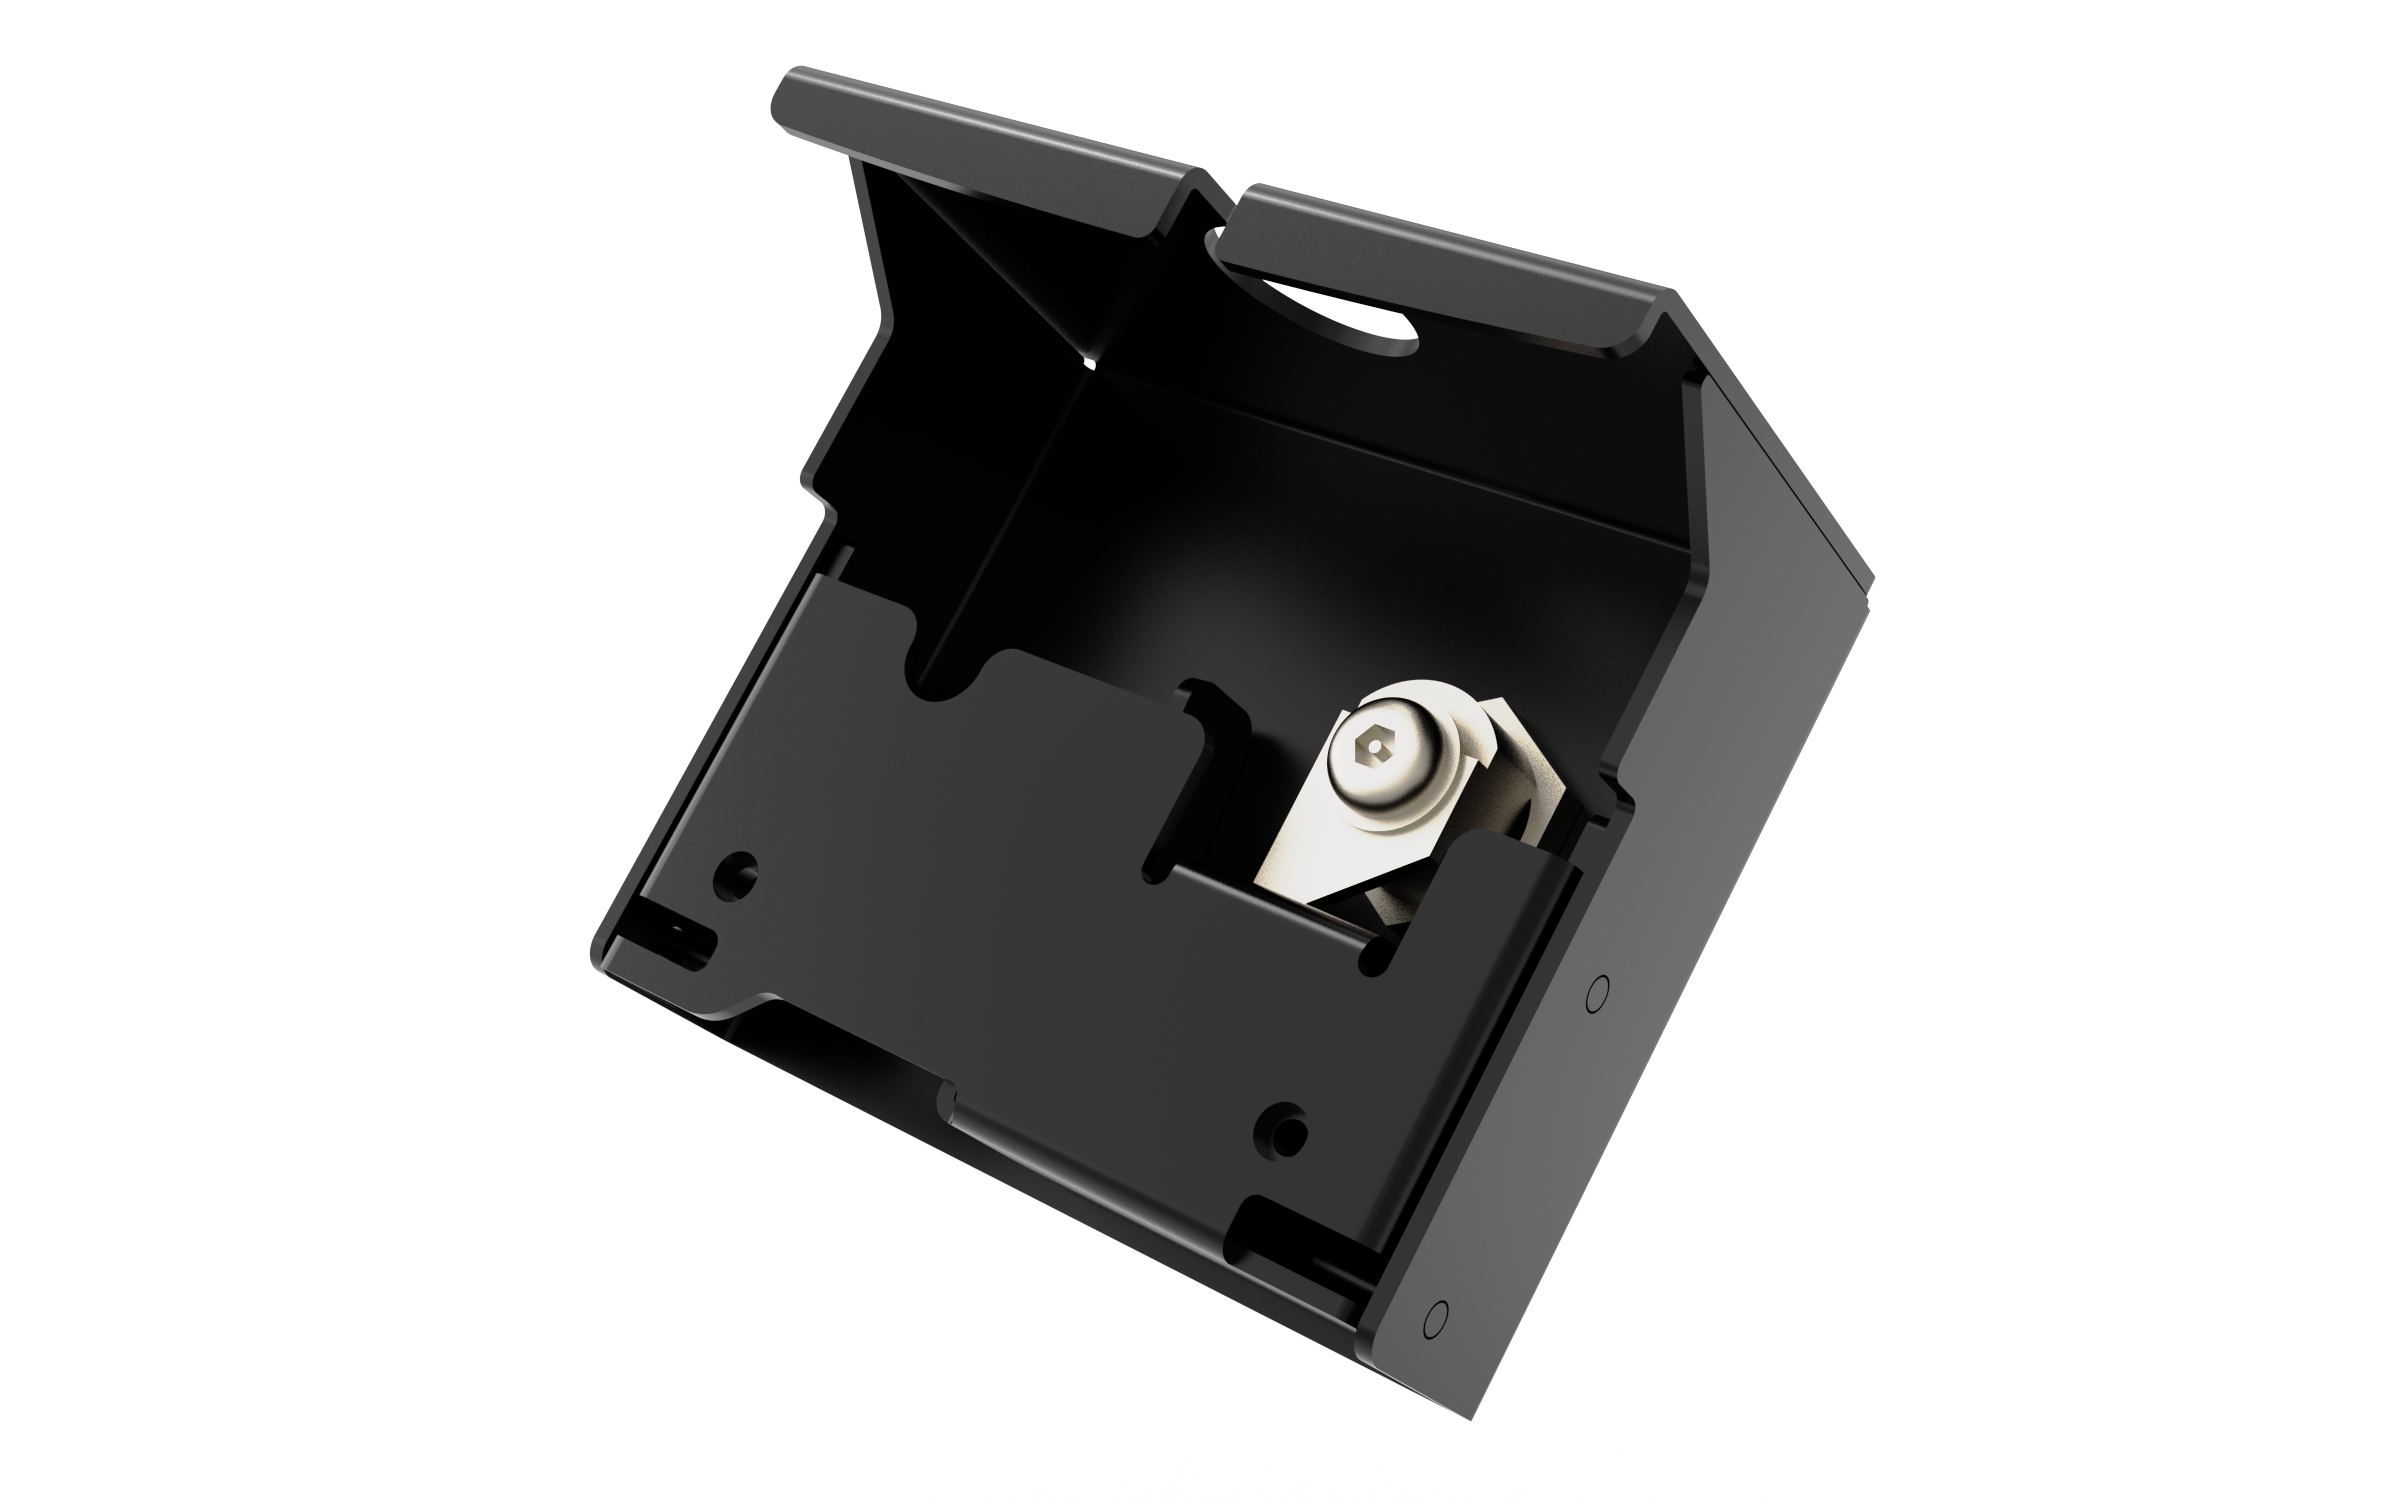 Rear Locking Add-on Kit for Verifone M440 Payment Terminals